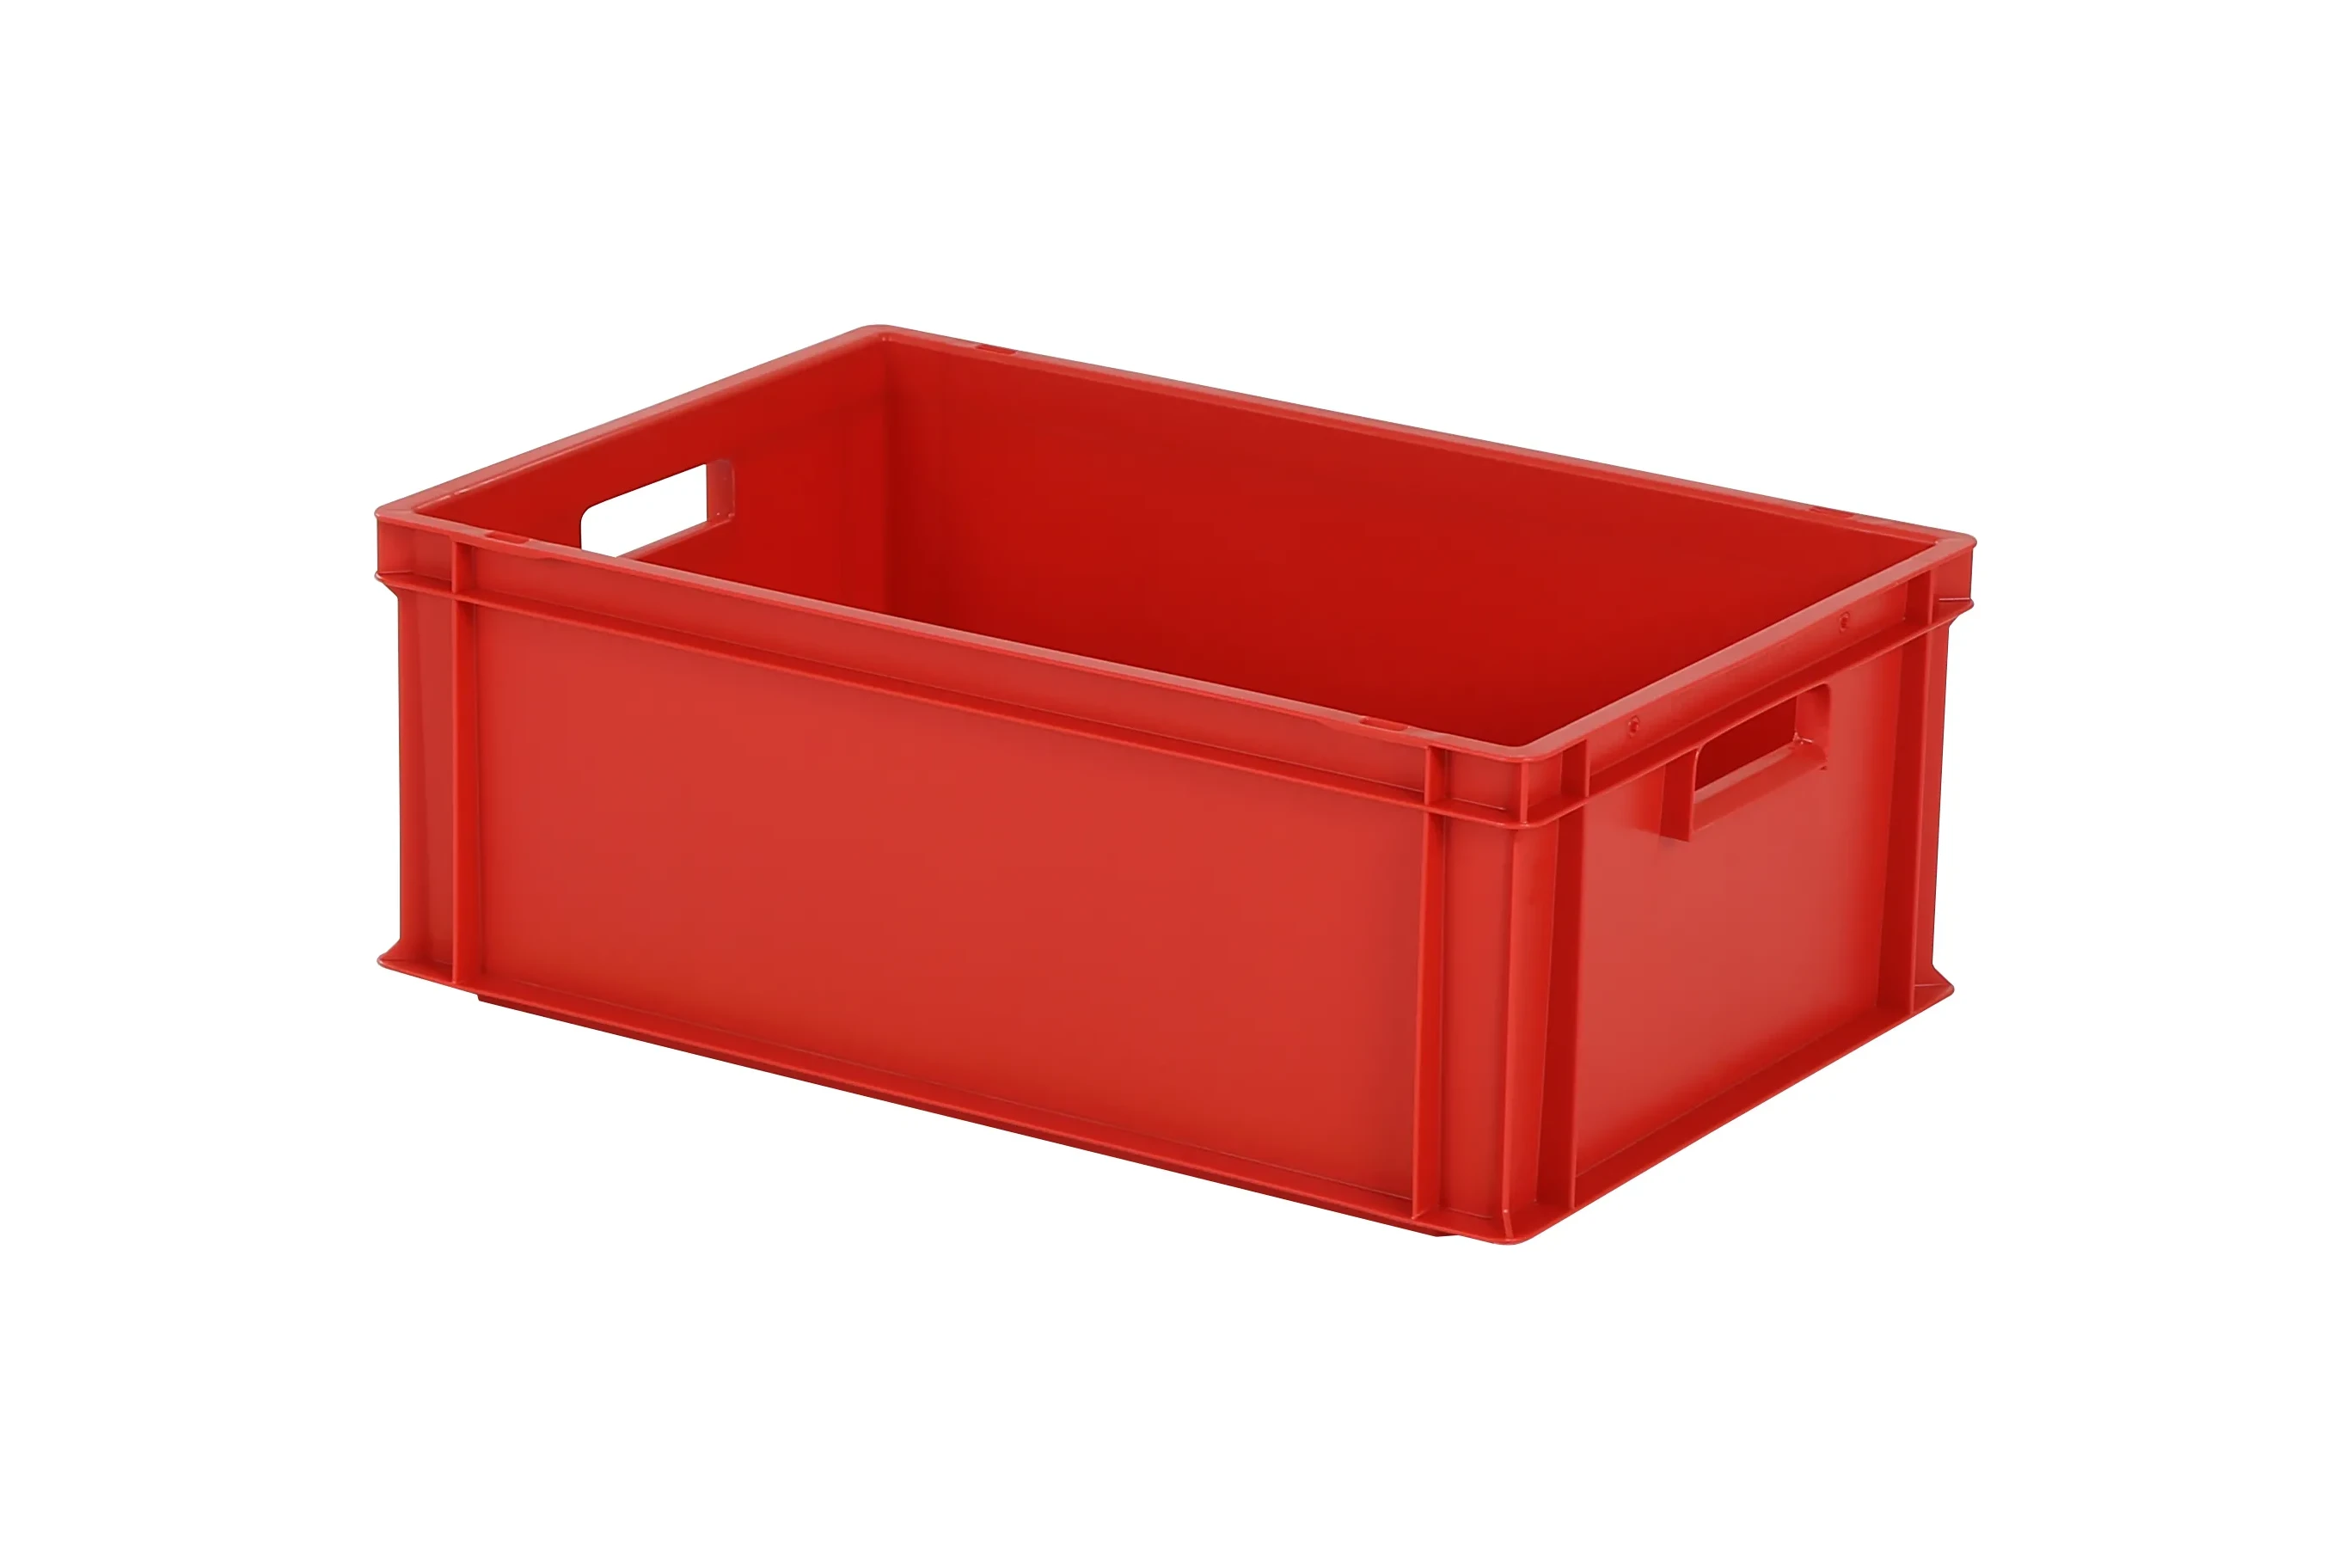 Stacking bin - 600 x 400 x H 220 mm - red (reinforced base)